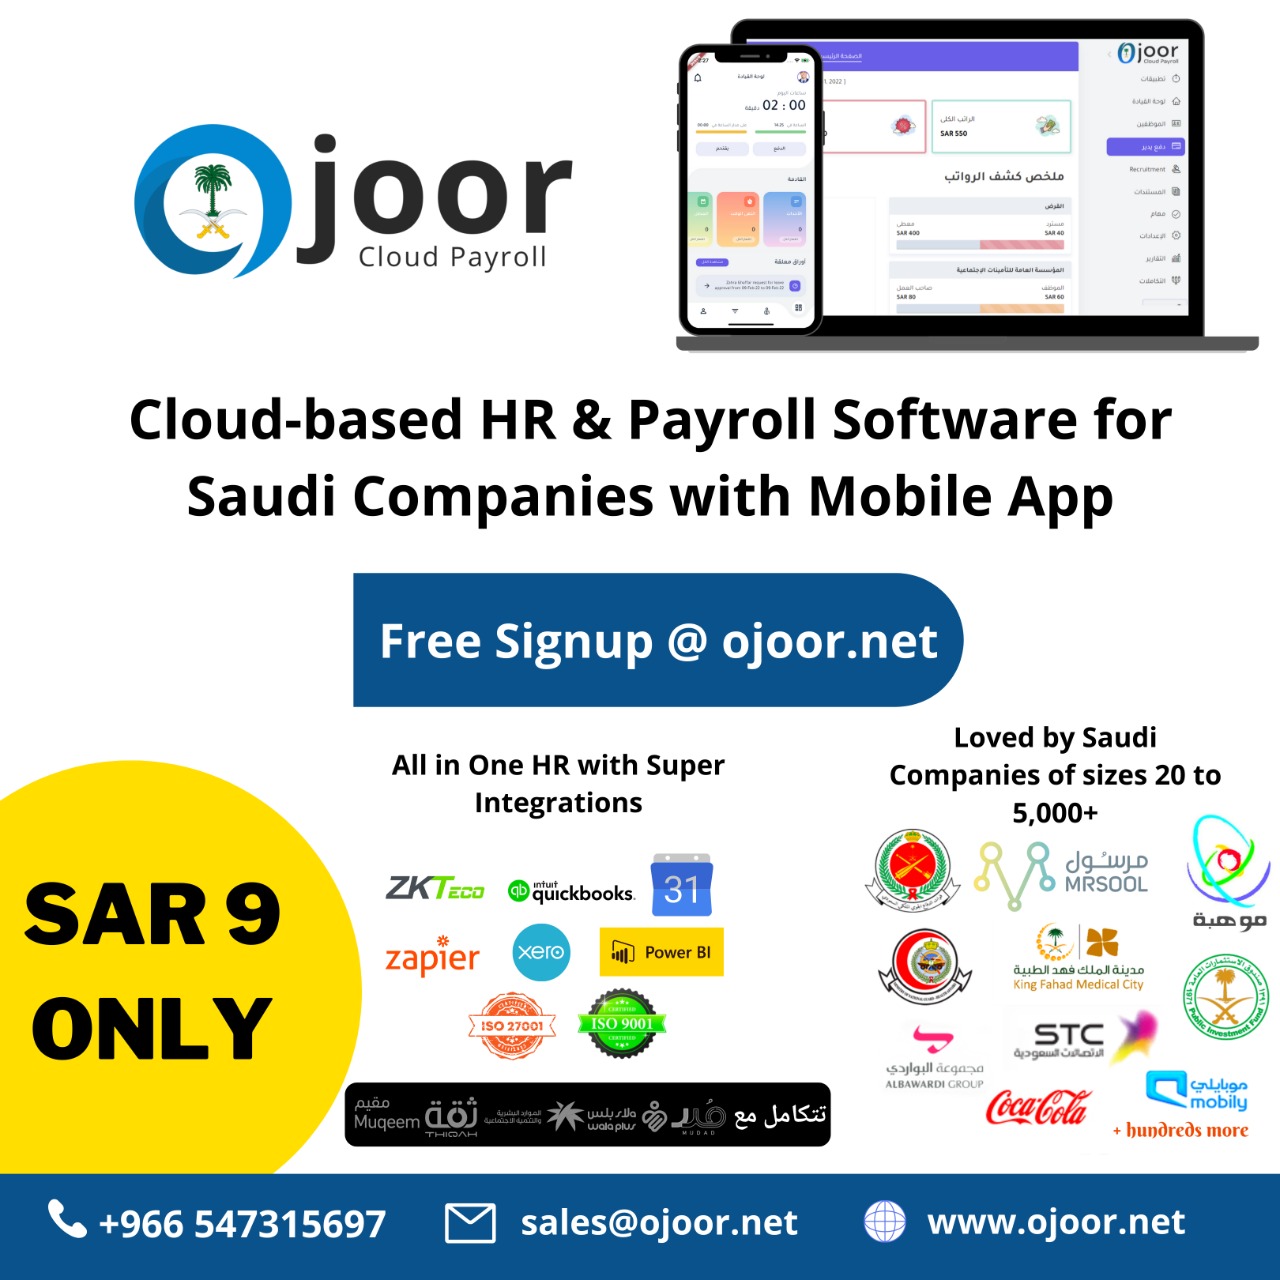 What are the Advantages of the Automated Payroll Software in Saudi?